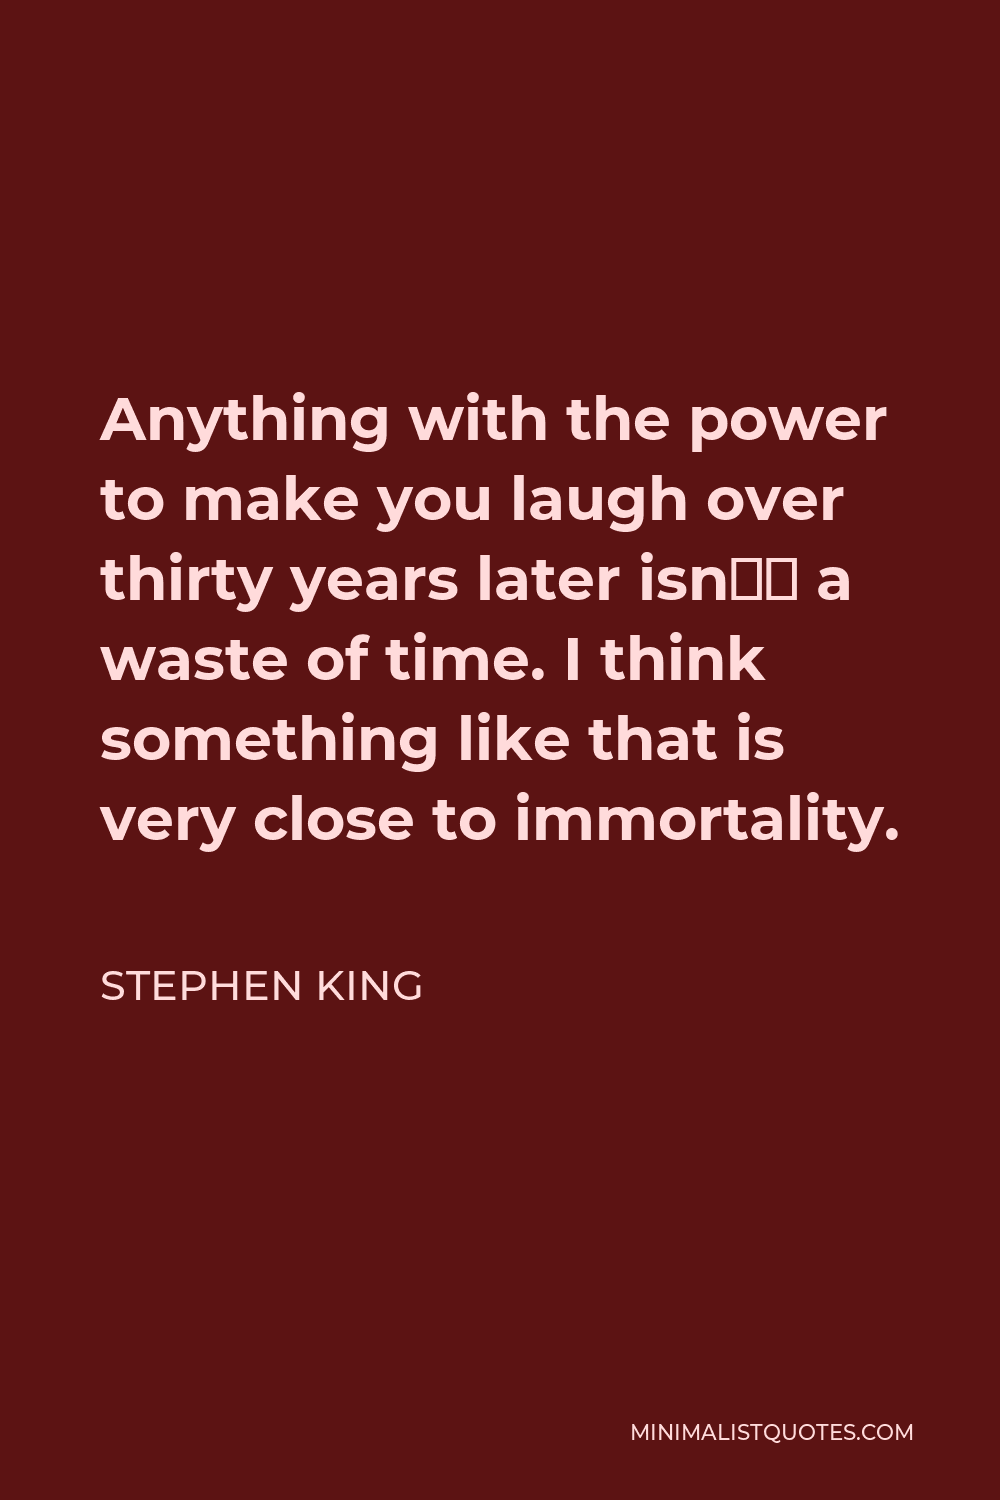 Stephen King Quote - Anything with the power to make you laugh over thirty years later isn’t a waste of time. I think something like that is very close to immortality.